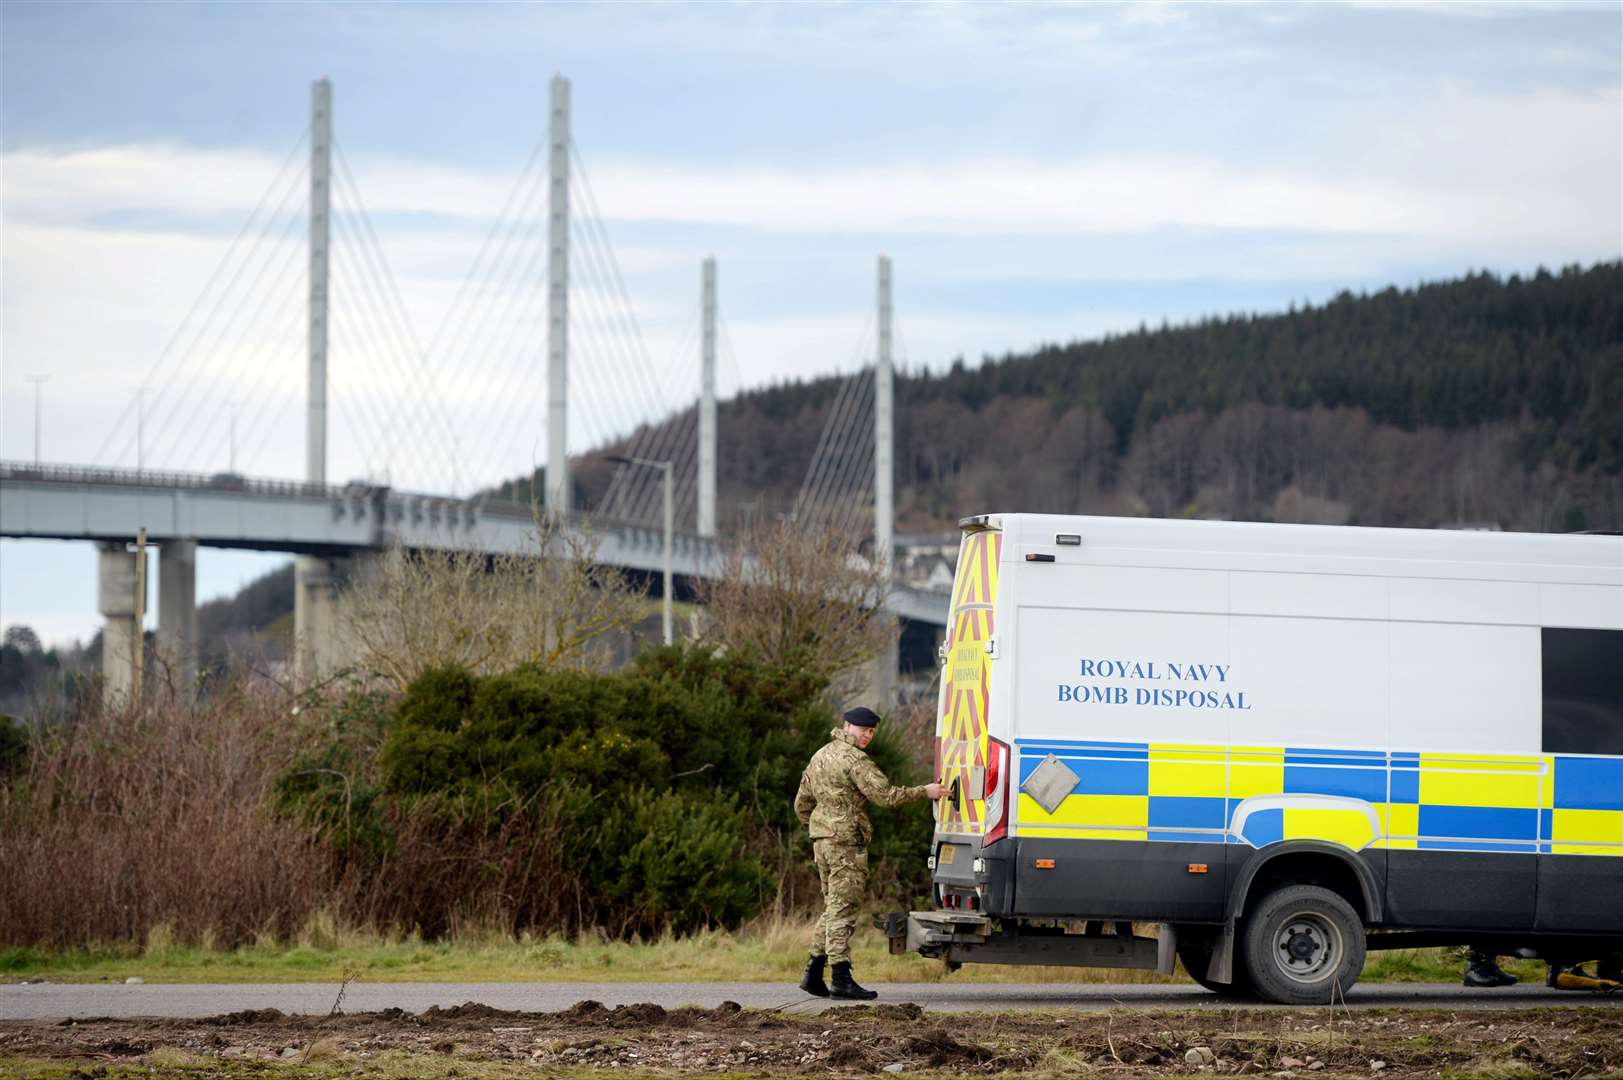 The Royal Navy bomb disposal team at the scene. Picture: James MacKenzie